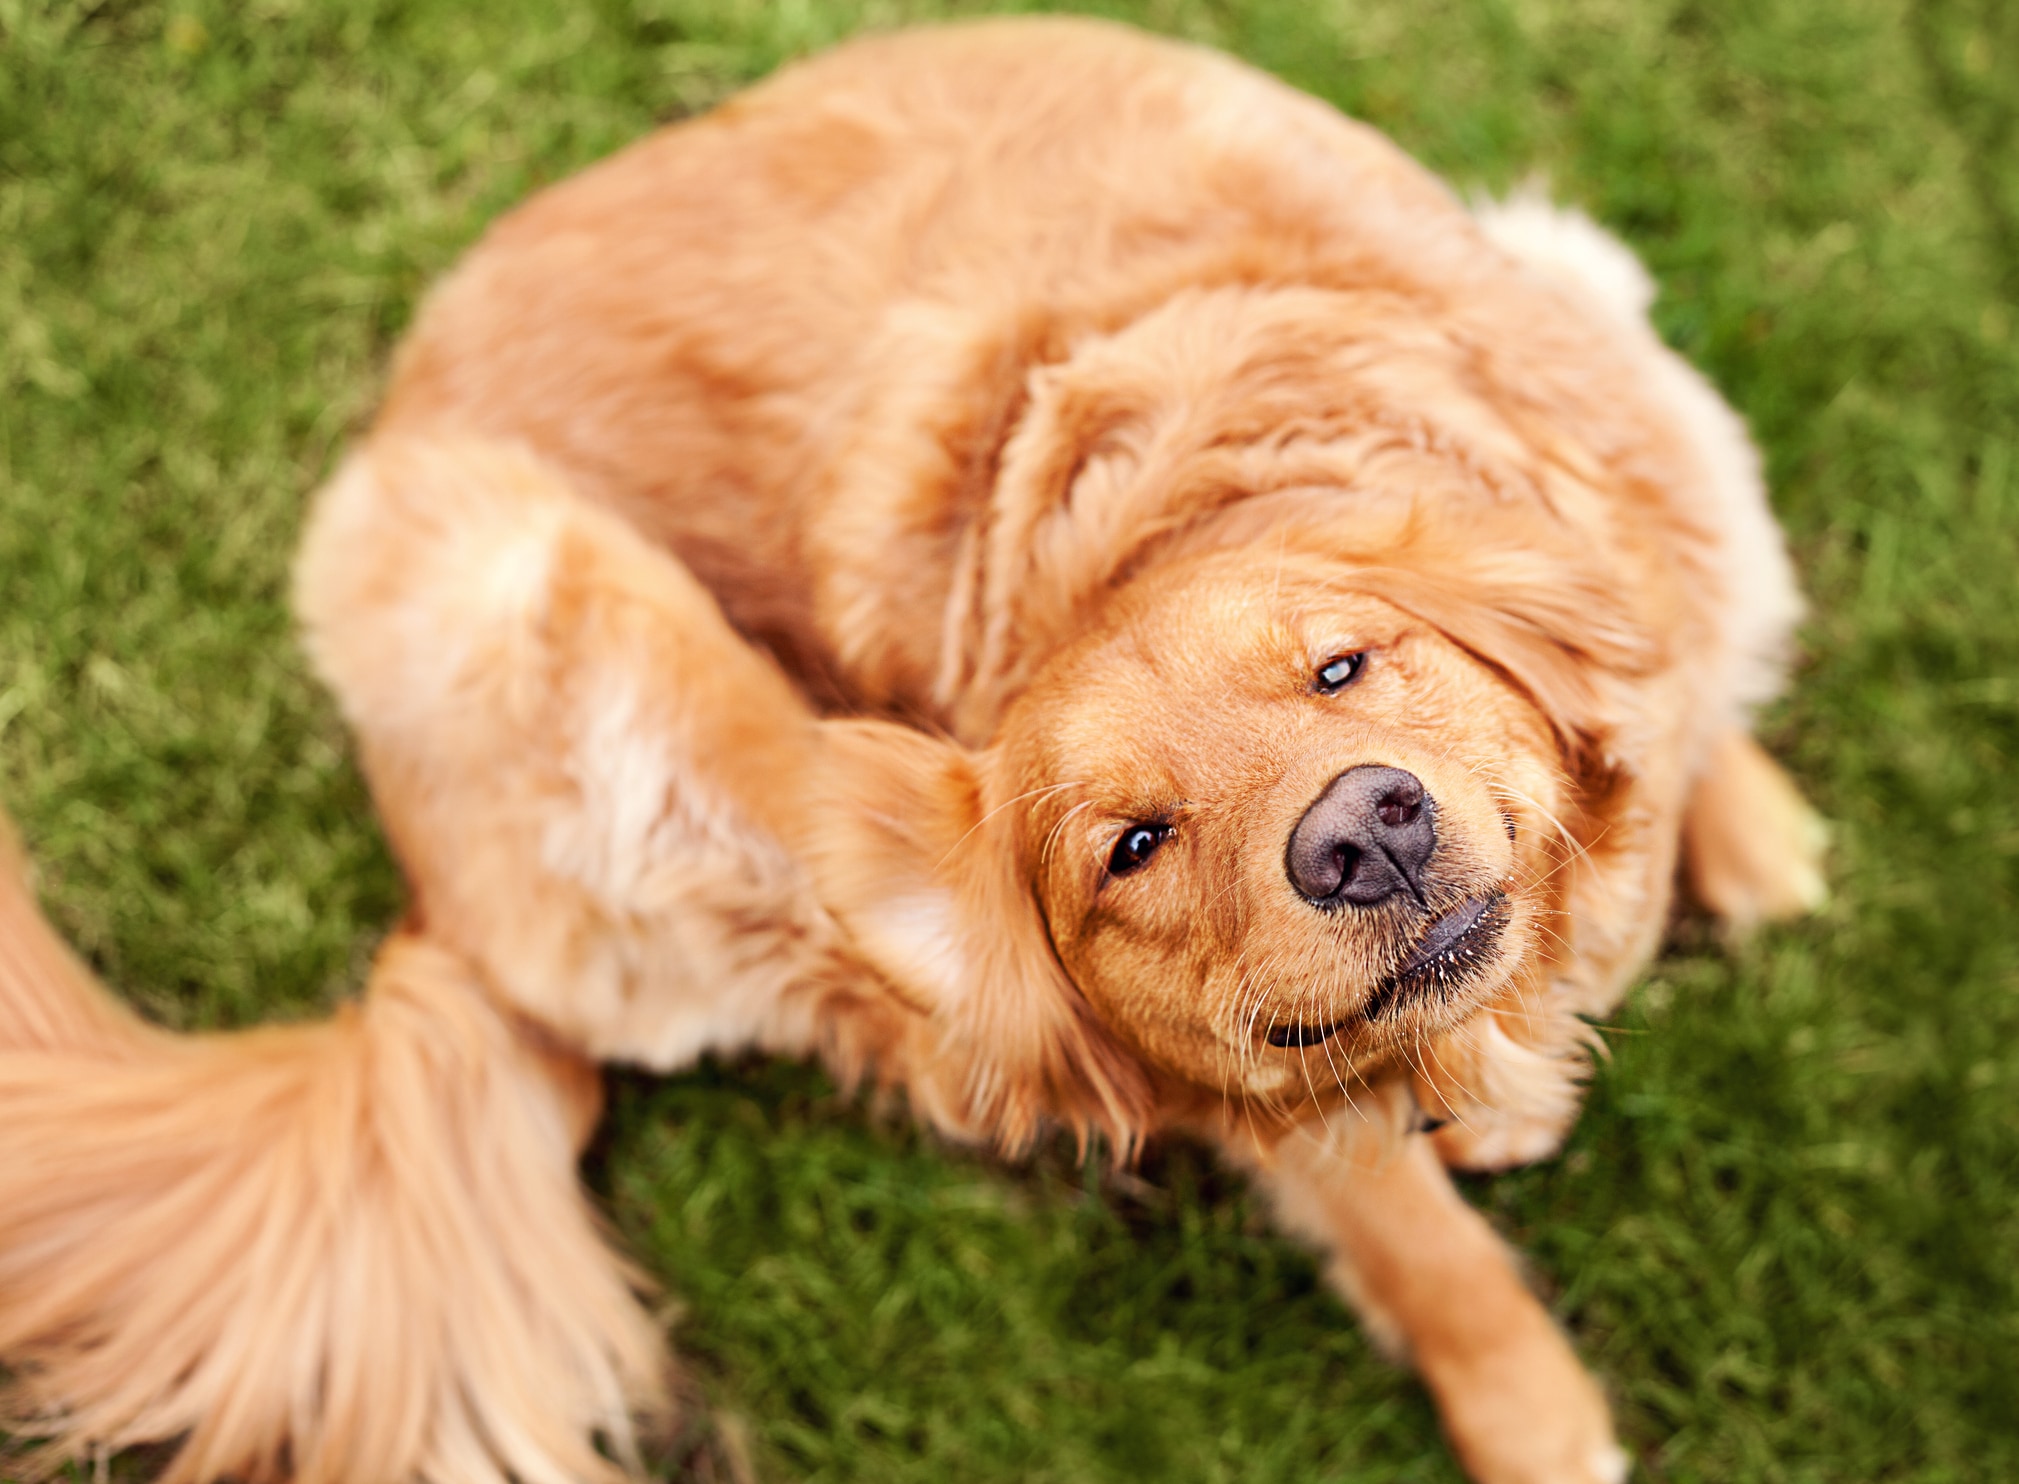 My Dog Has Fleas: What to Do If Your Dog Brings Fleas Home